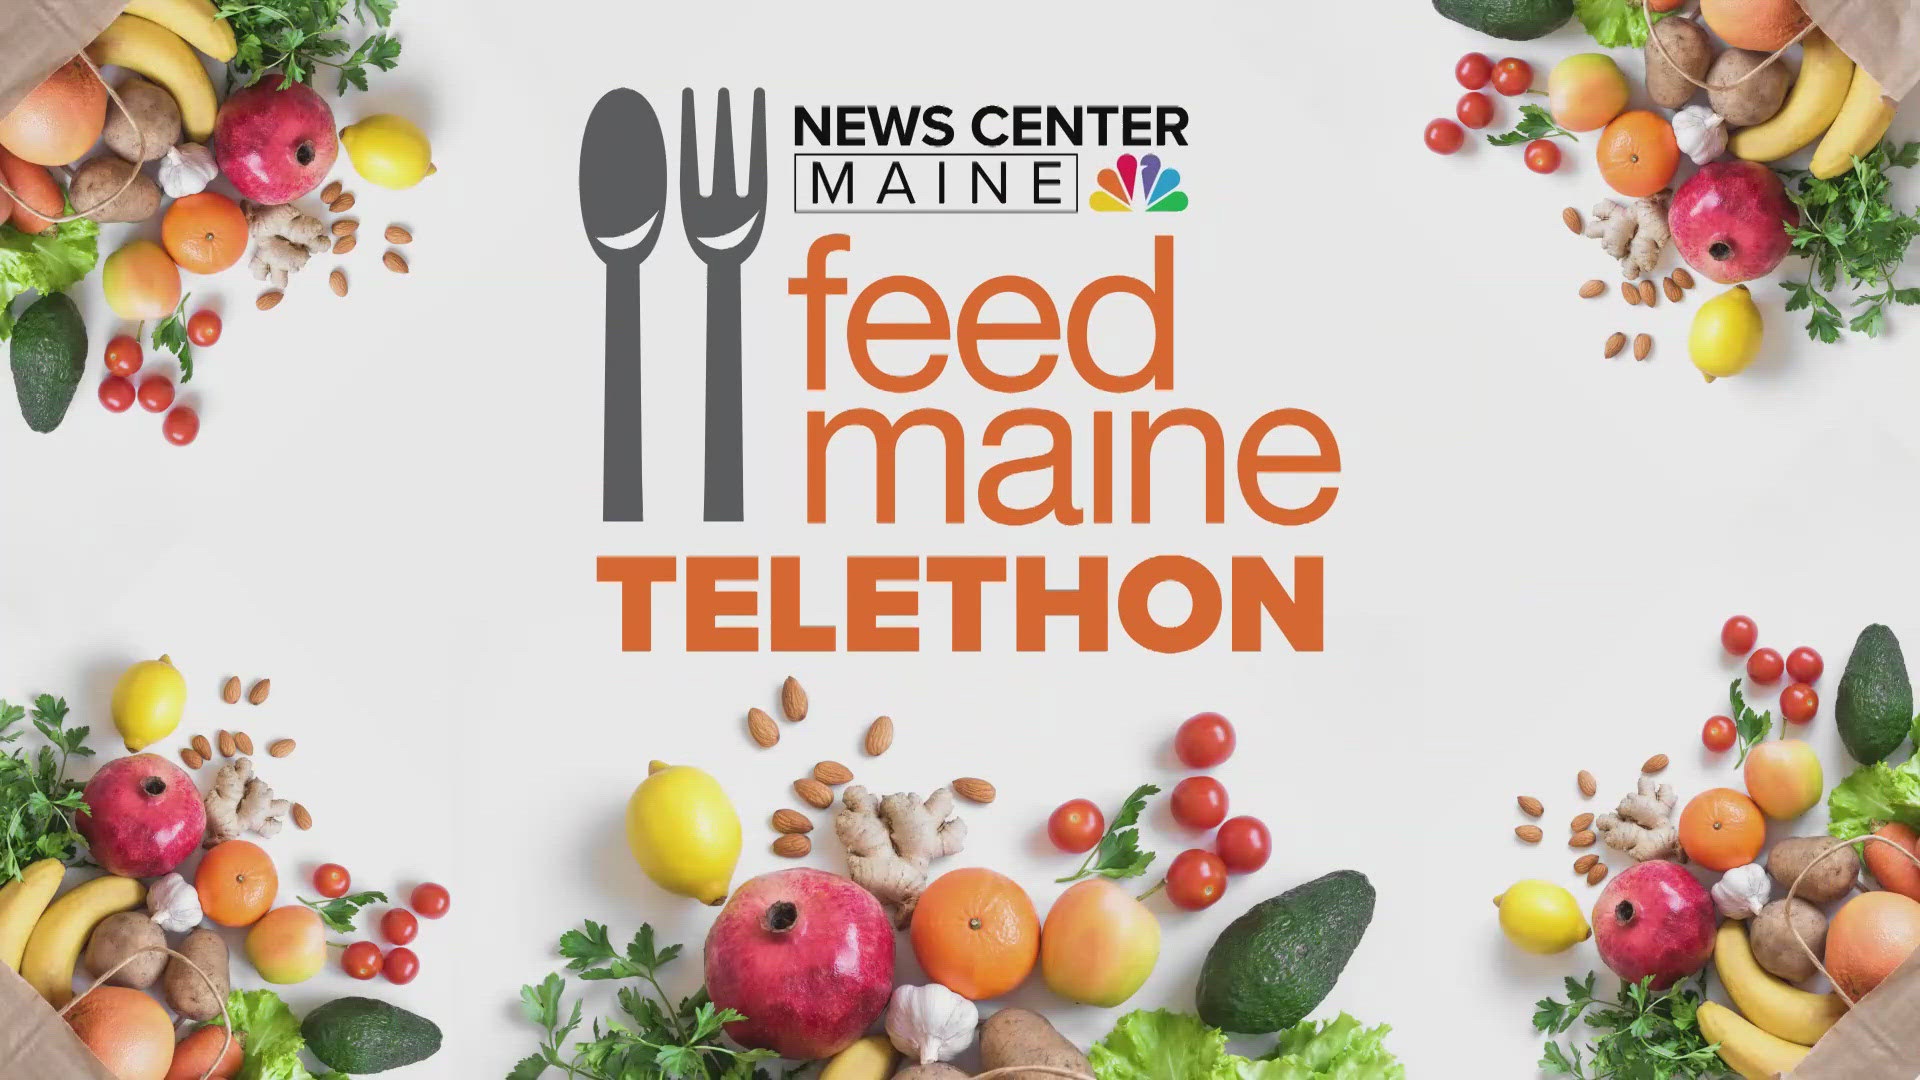 Phone lines will be open from 5 a.m. to 8 p.m. Call to Donate: 855-875-4328. Hannaford will feature a 'Matching Mainers' hour from 5:30-6:30 p.m.